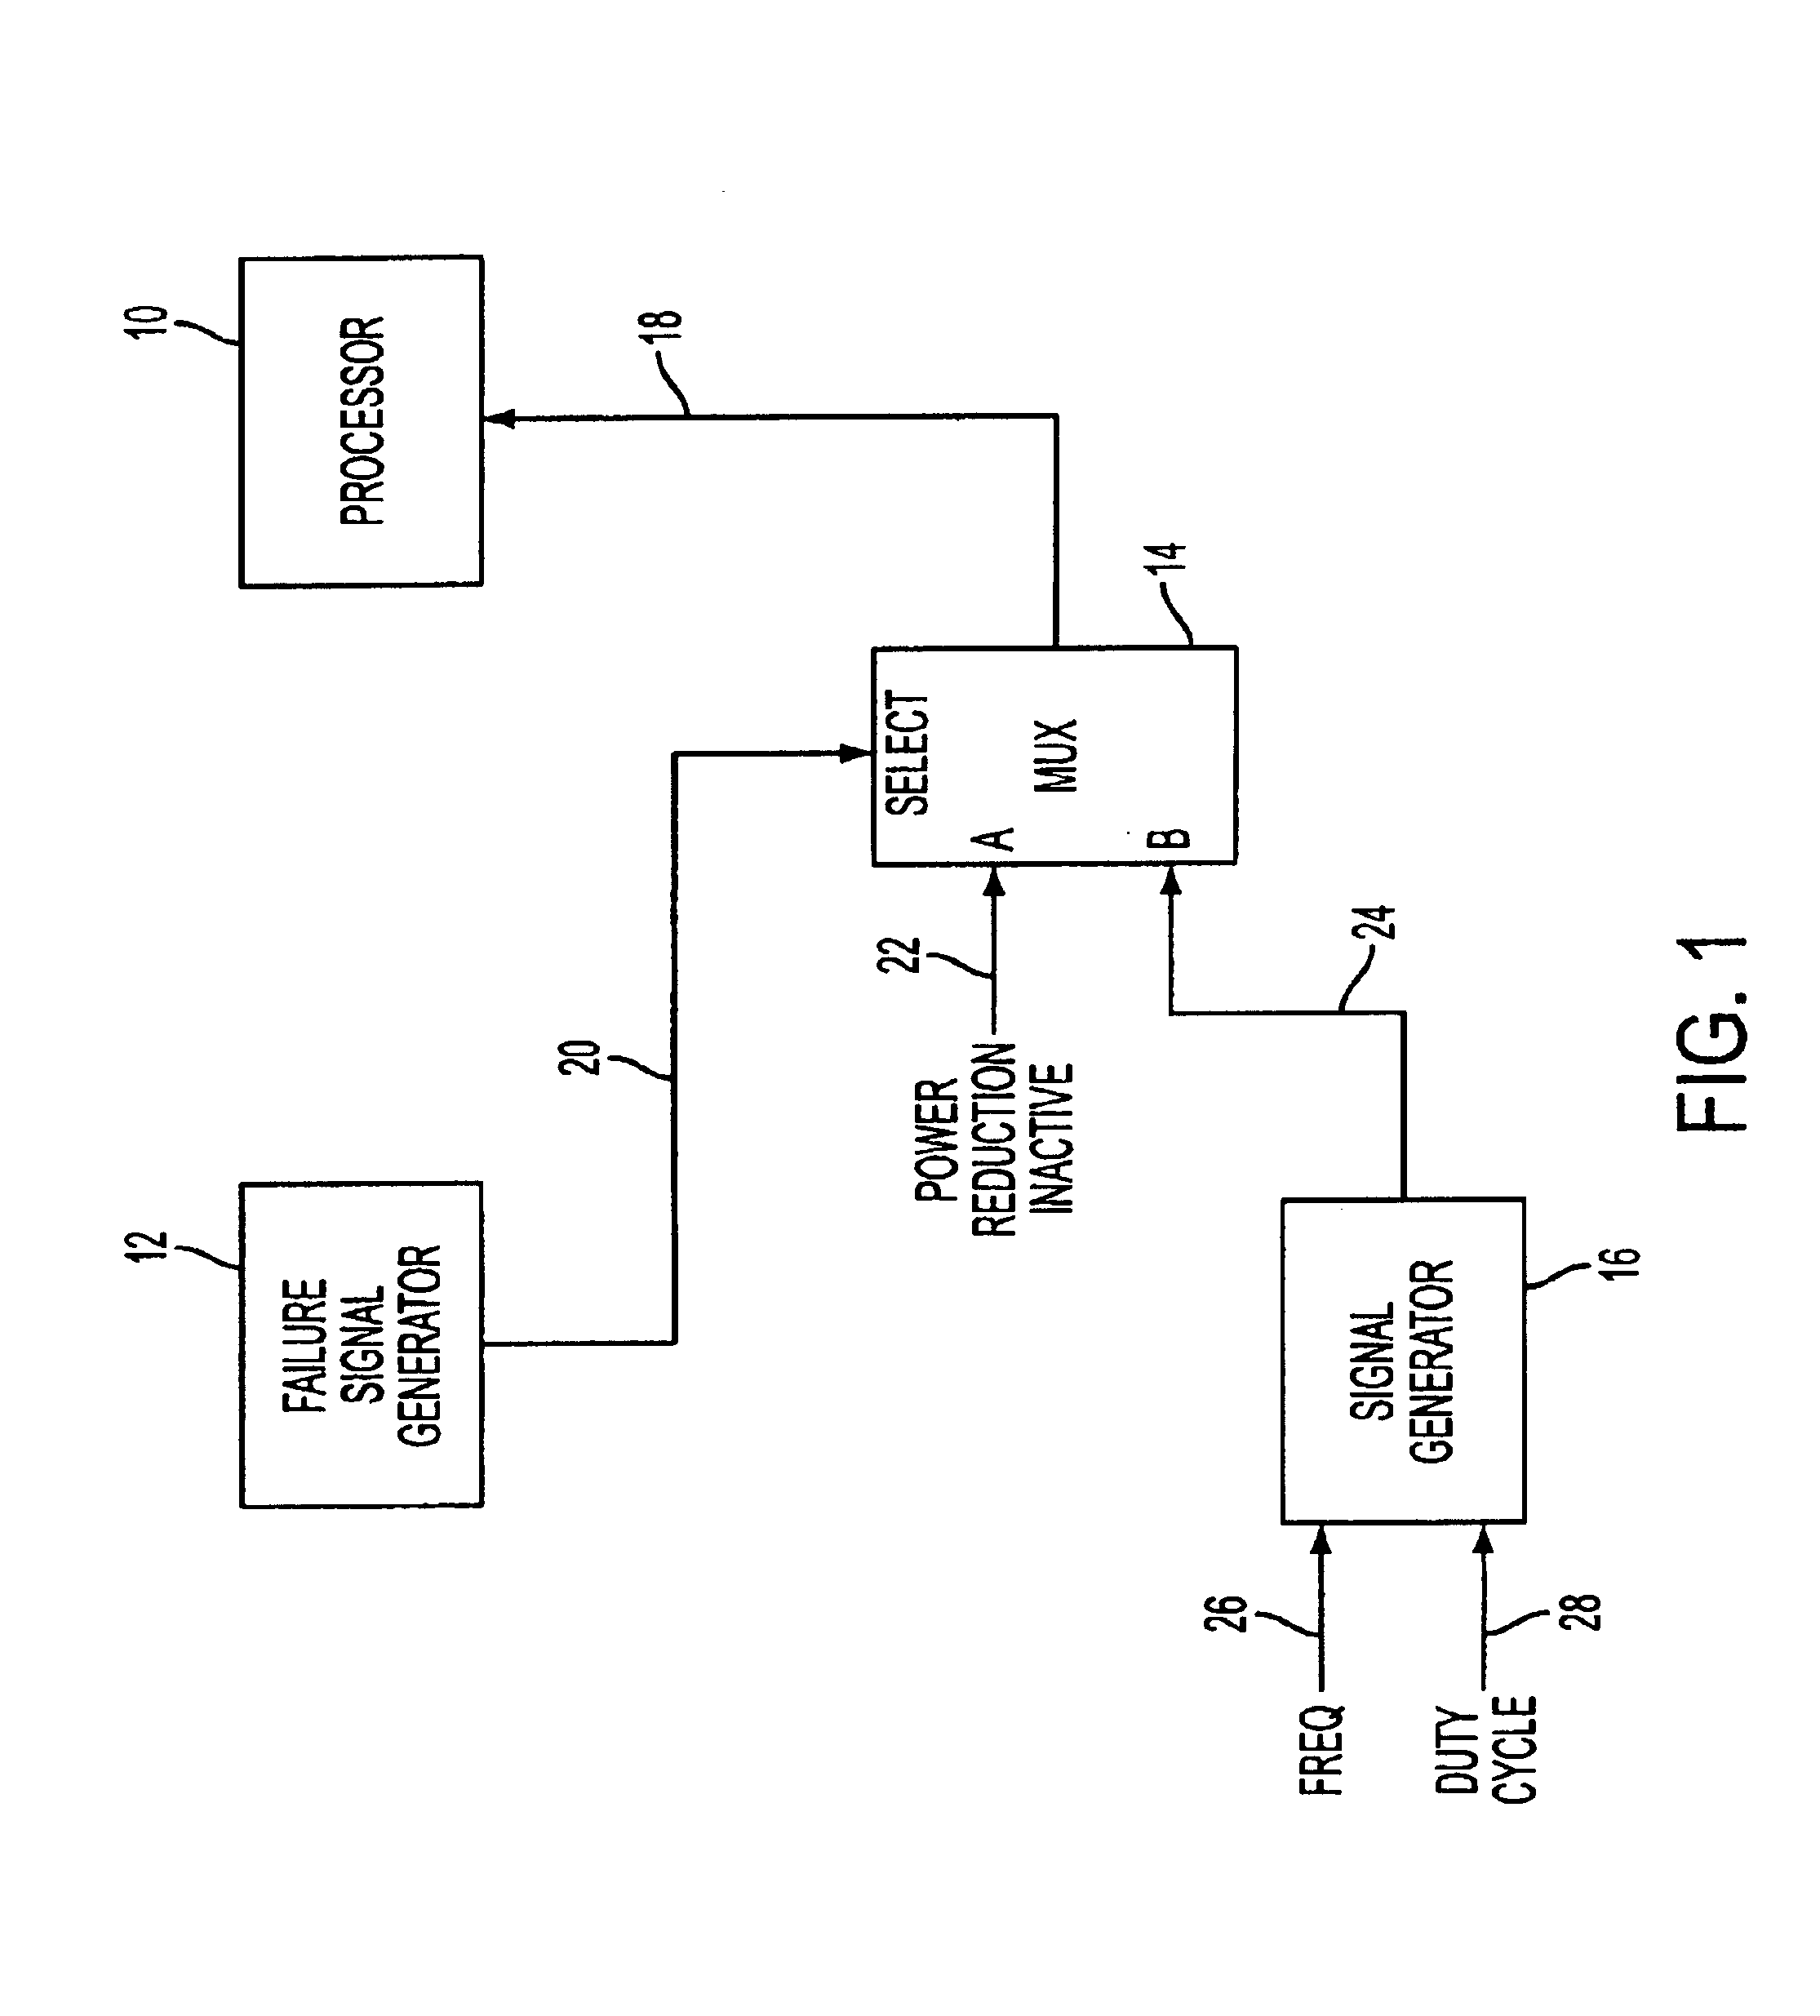 Apparatus, method and computer system for reducing power consumption of a processor or processors upon occurrence of a failure condition affecting the processor or processors